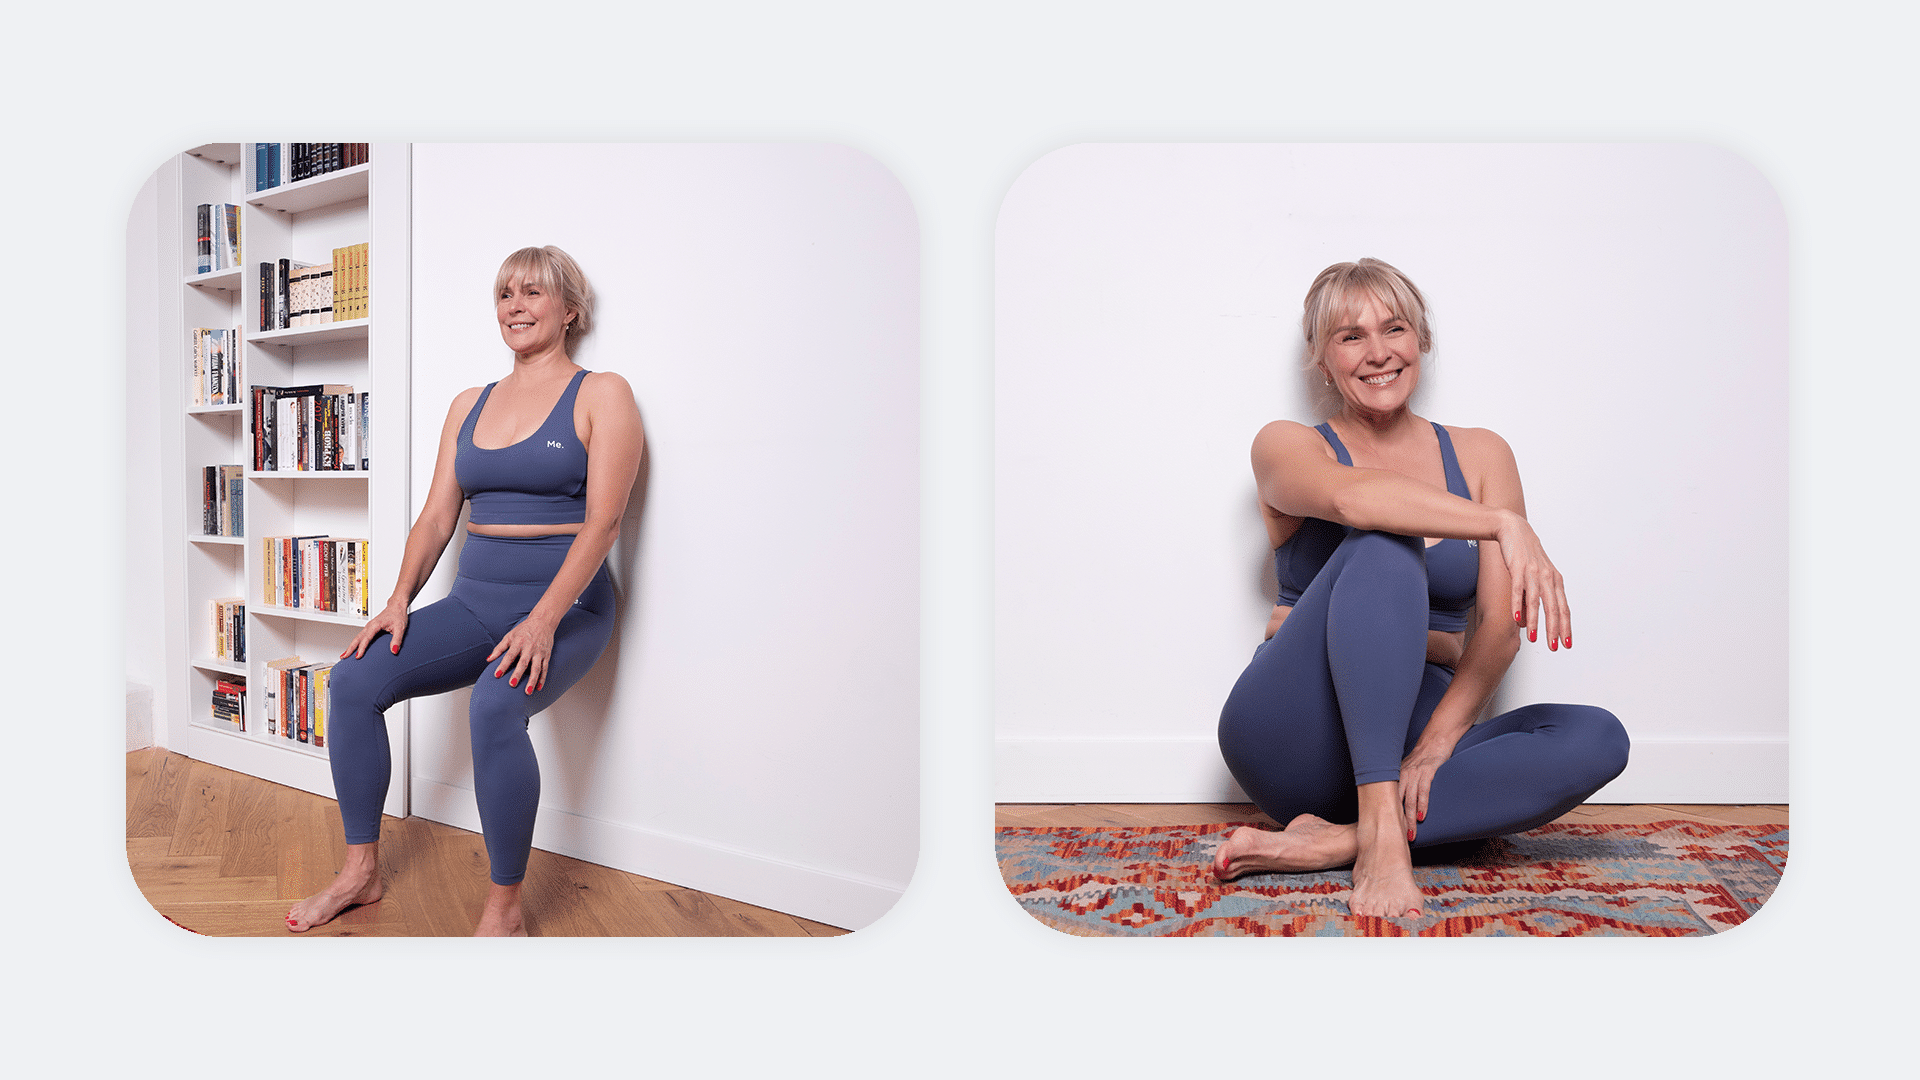 Wall Pilates for Seniors to Lose Weight: Regain your Fitness with 28 Days  of Guided, Low-impact Exercises; just 10 Minutes of Proper Training per Day